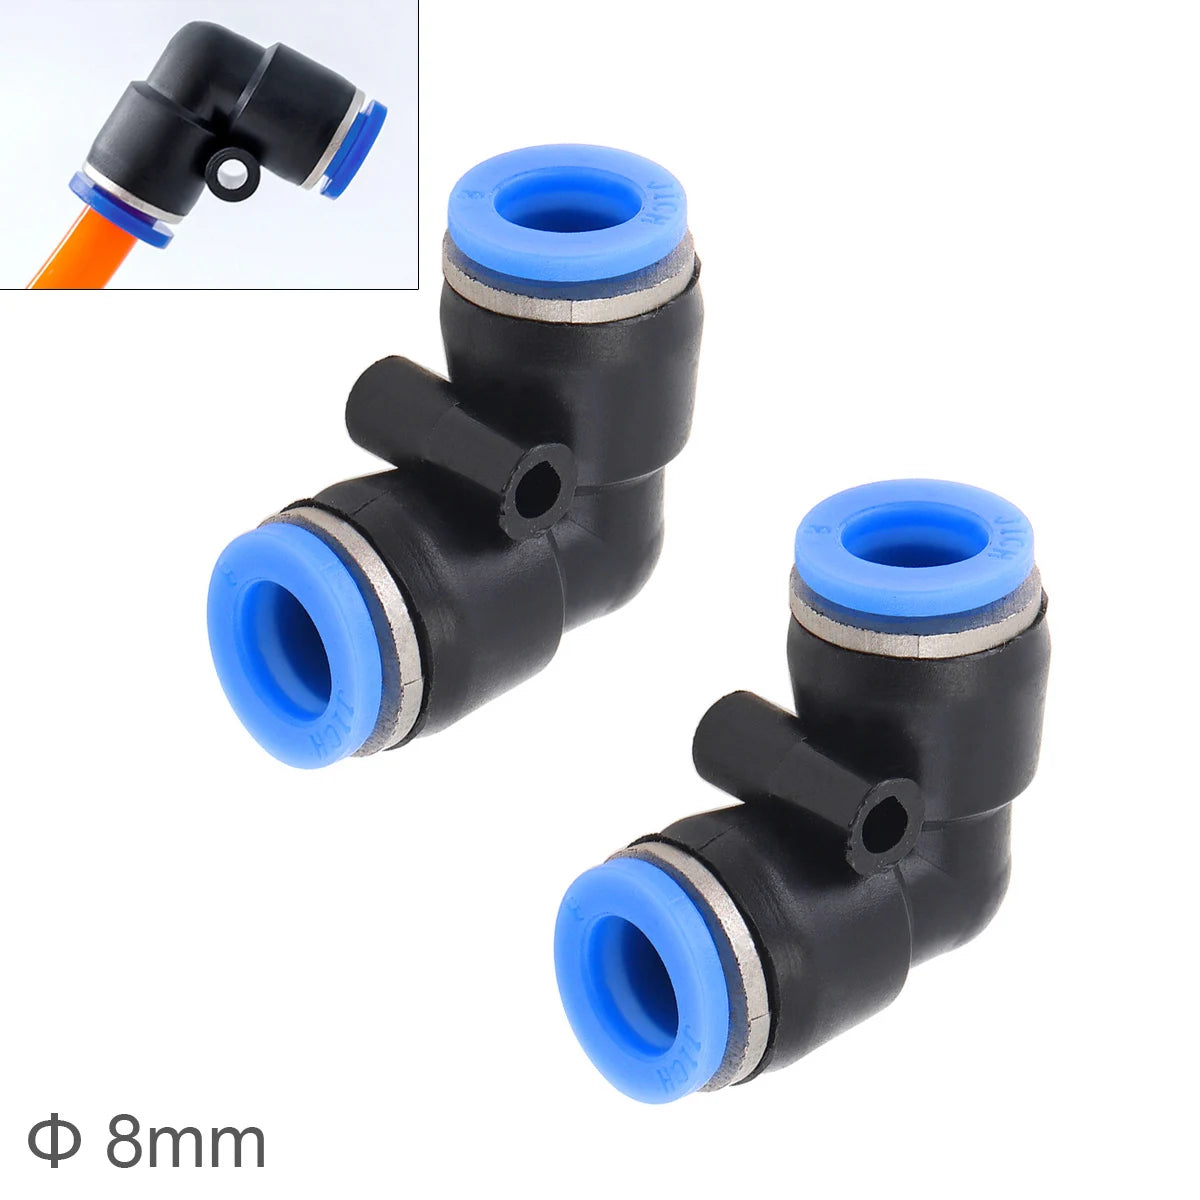 2pcs 8mm L Shaped Elbow Plastic Two-way Pneumatic Quick Connector Pneumatic Insertion Air Tubes